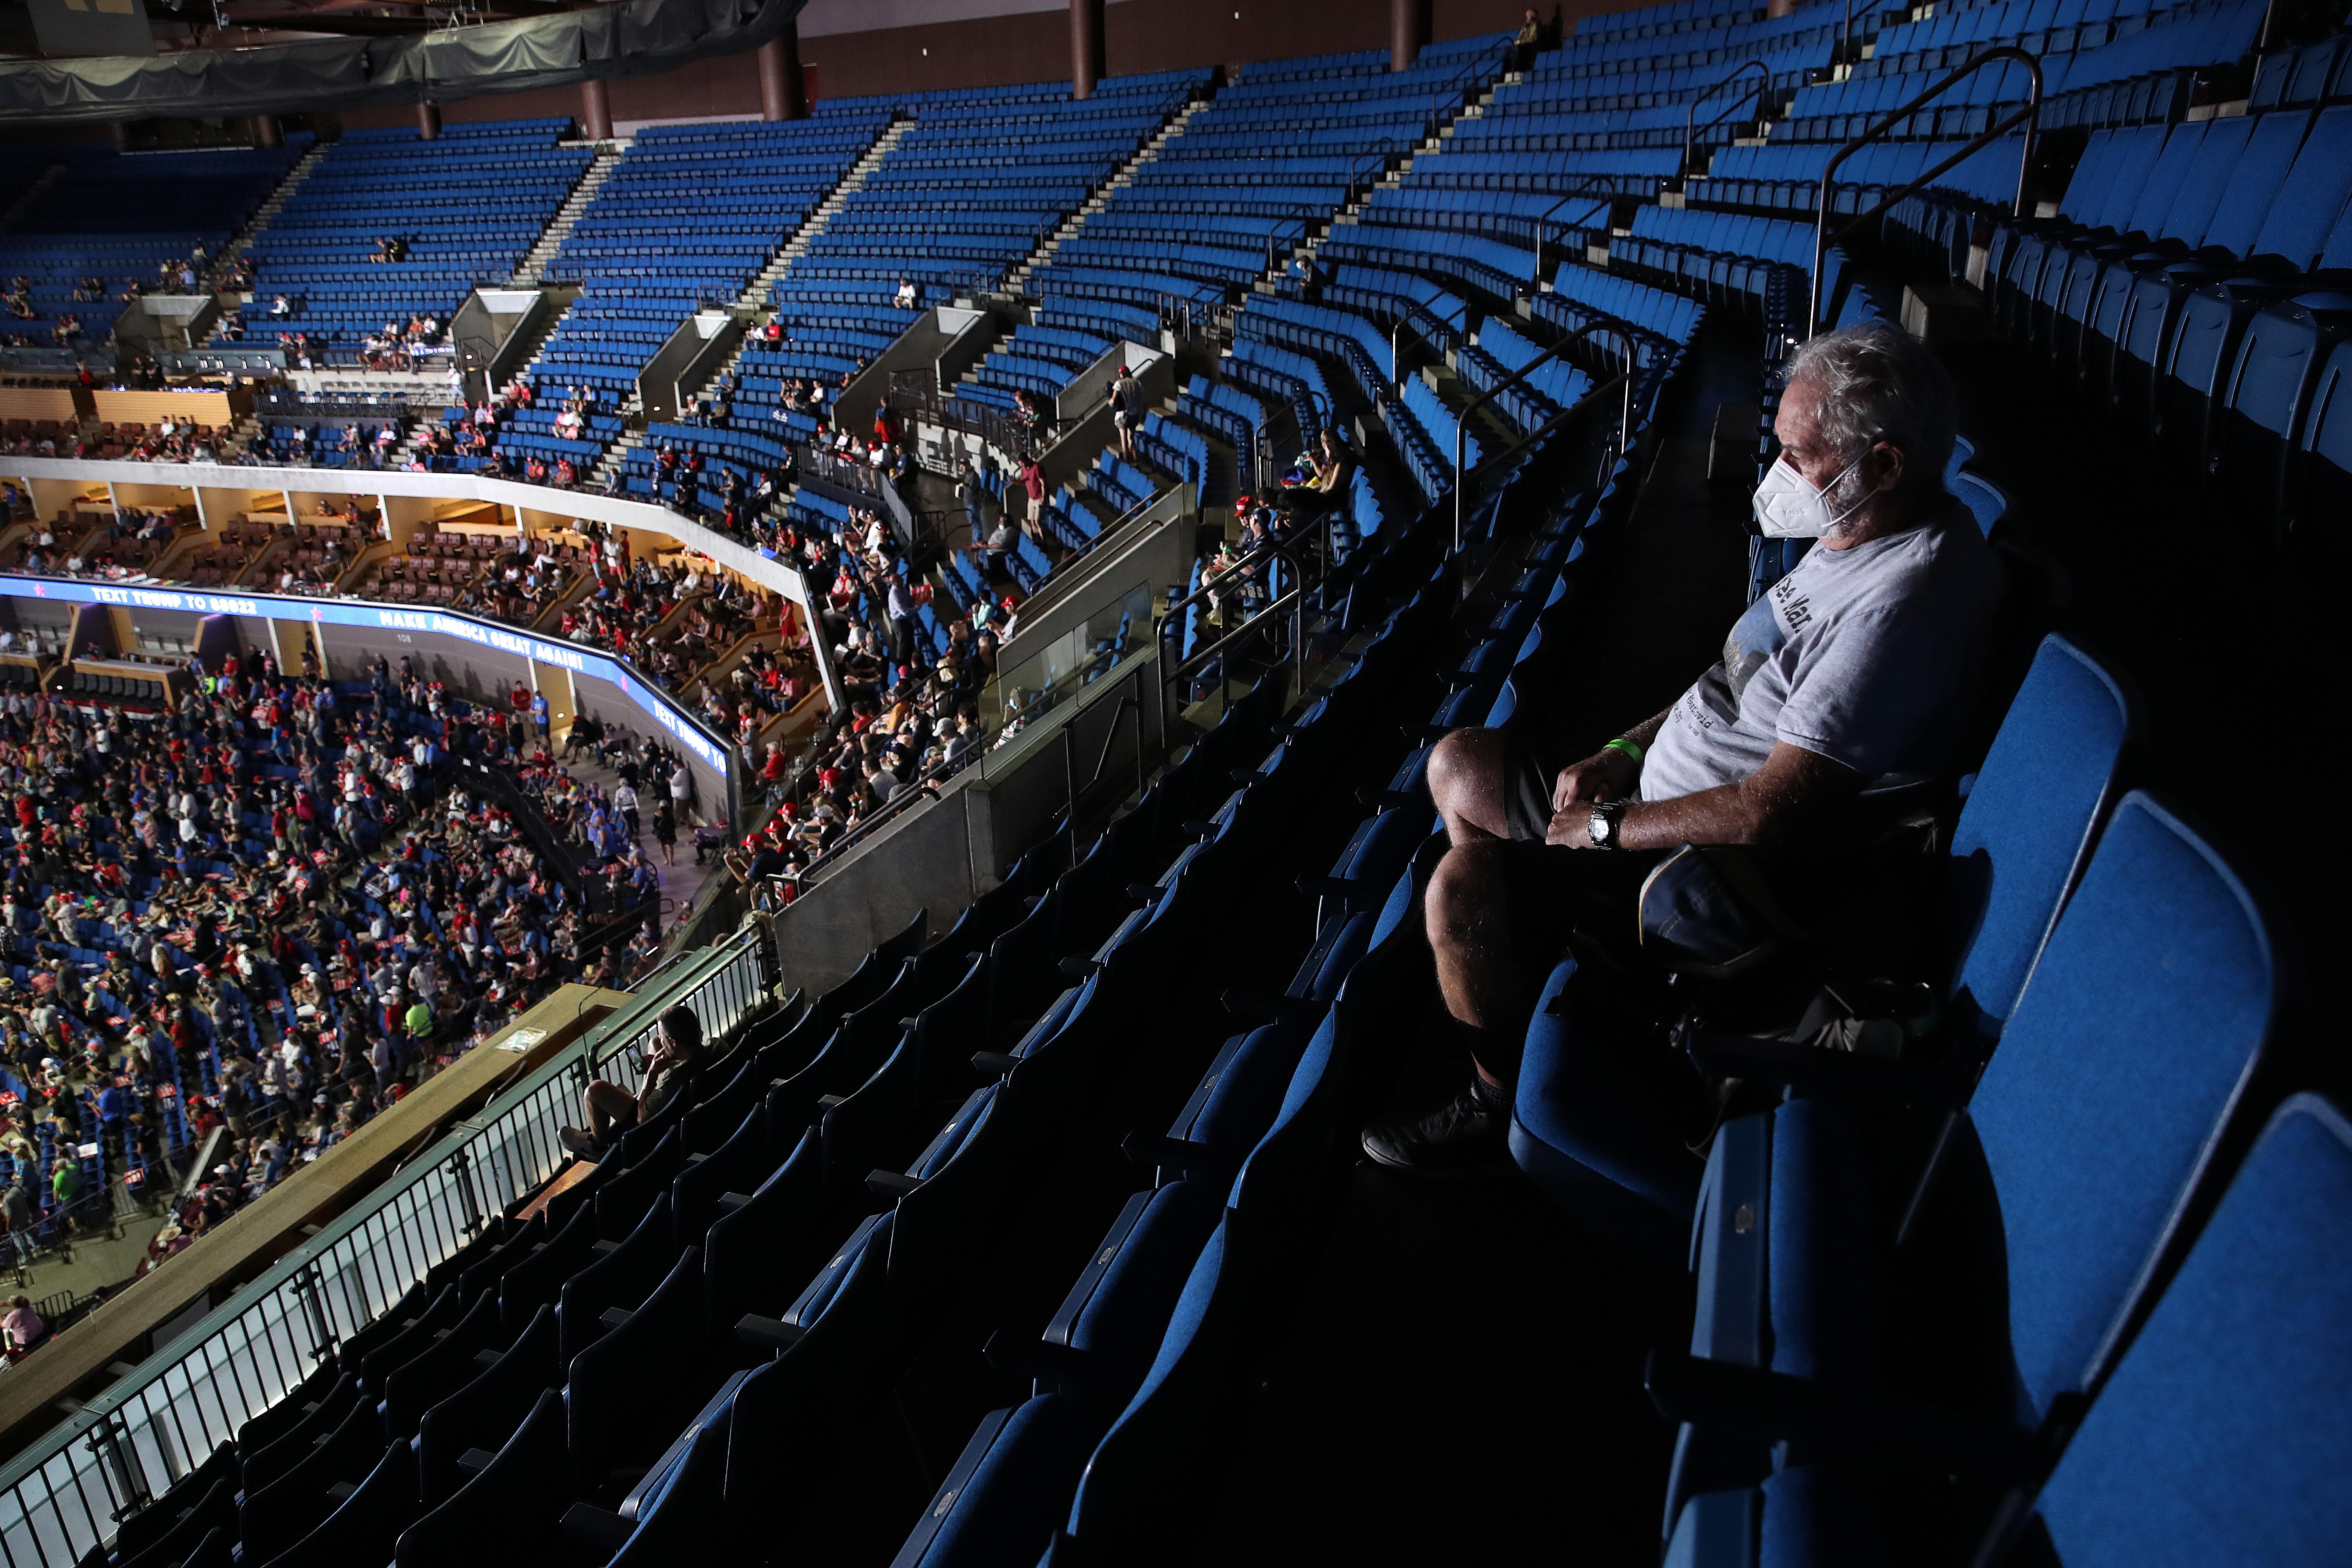 A Trump supporter sits in the upper tier of the arena, which is almost completely empty.